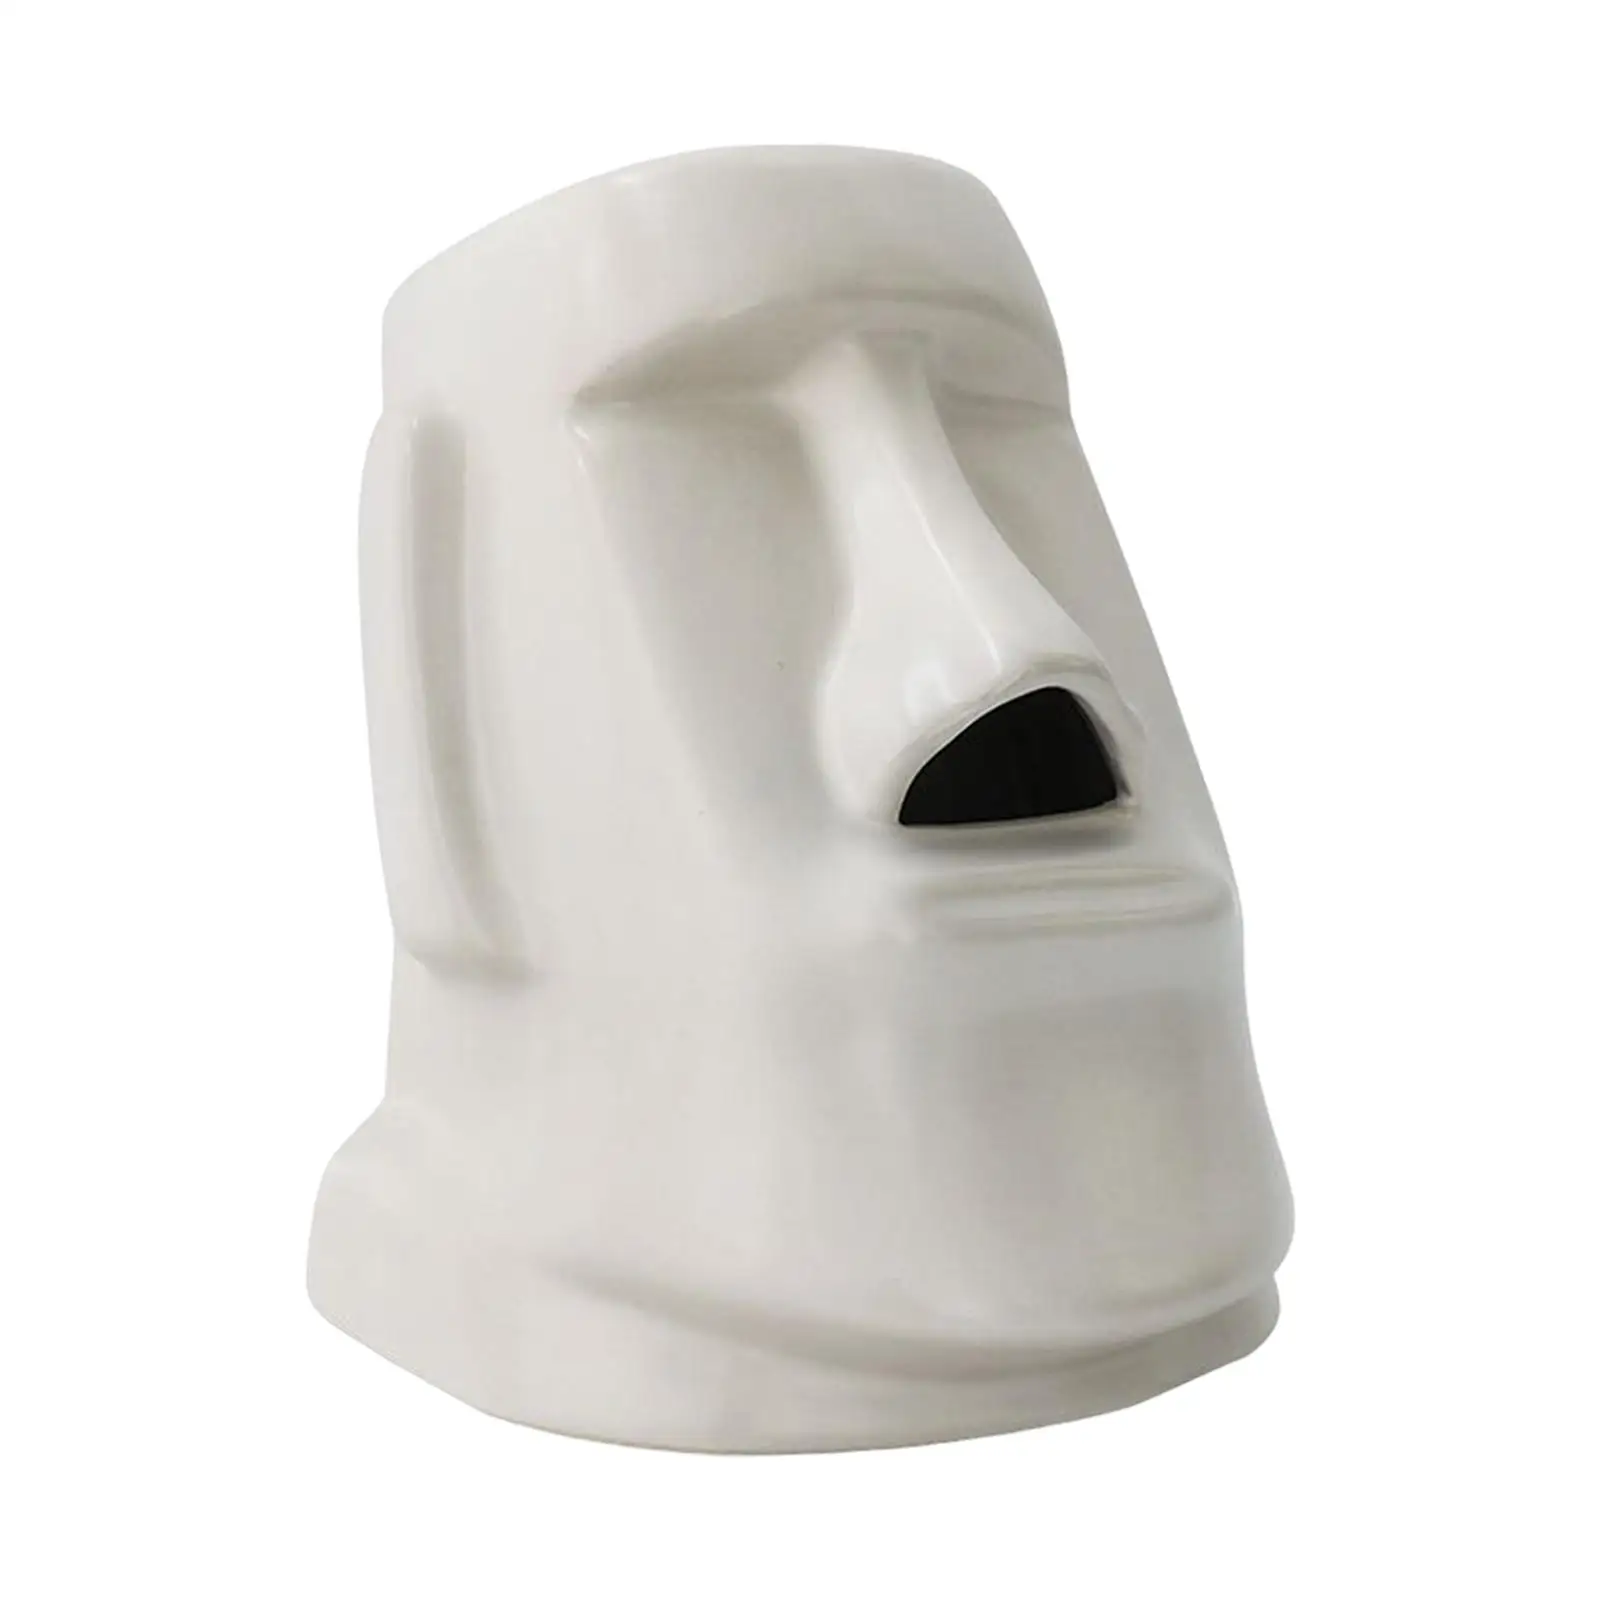 Facial Tissues Container Sculpture Statue Tissue Box for NightStand Dormitory